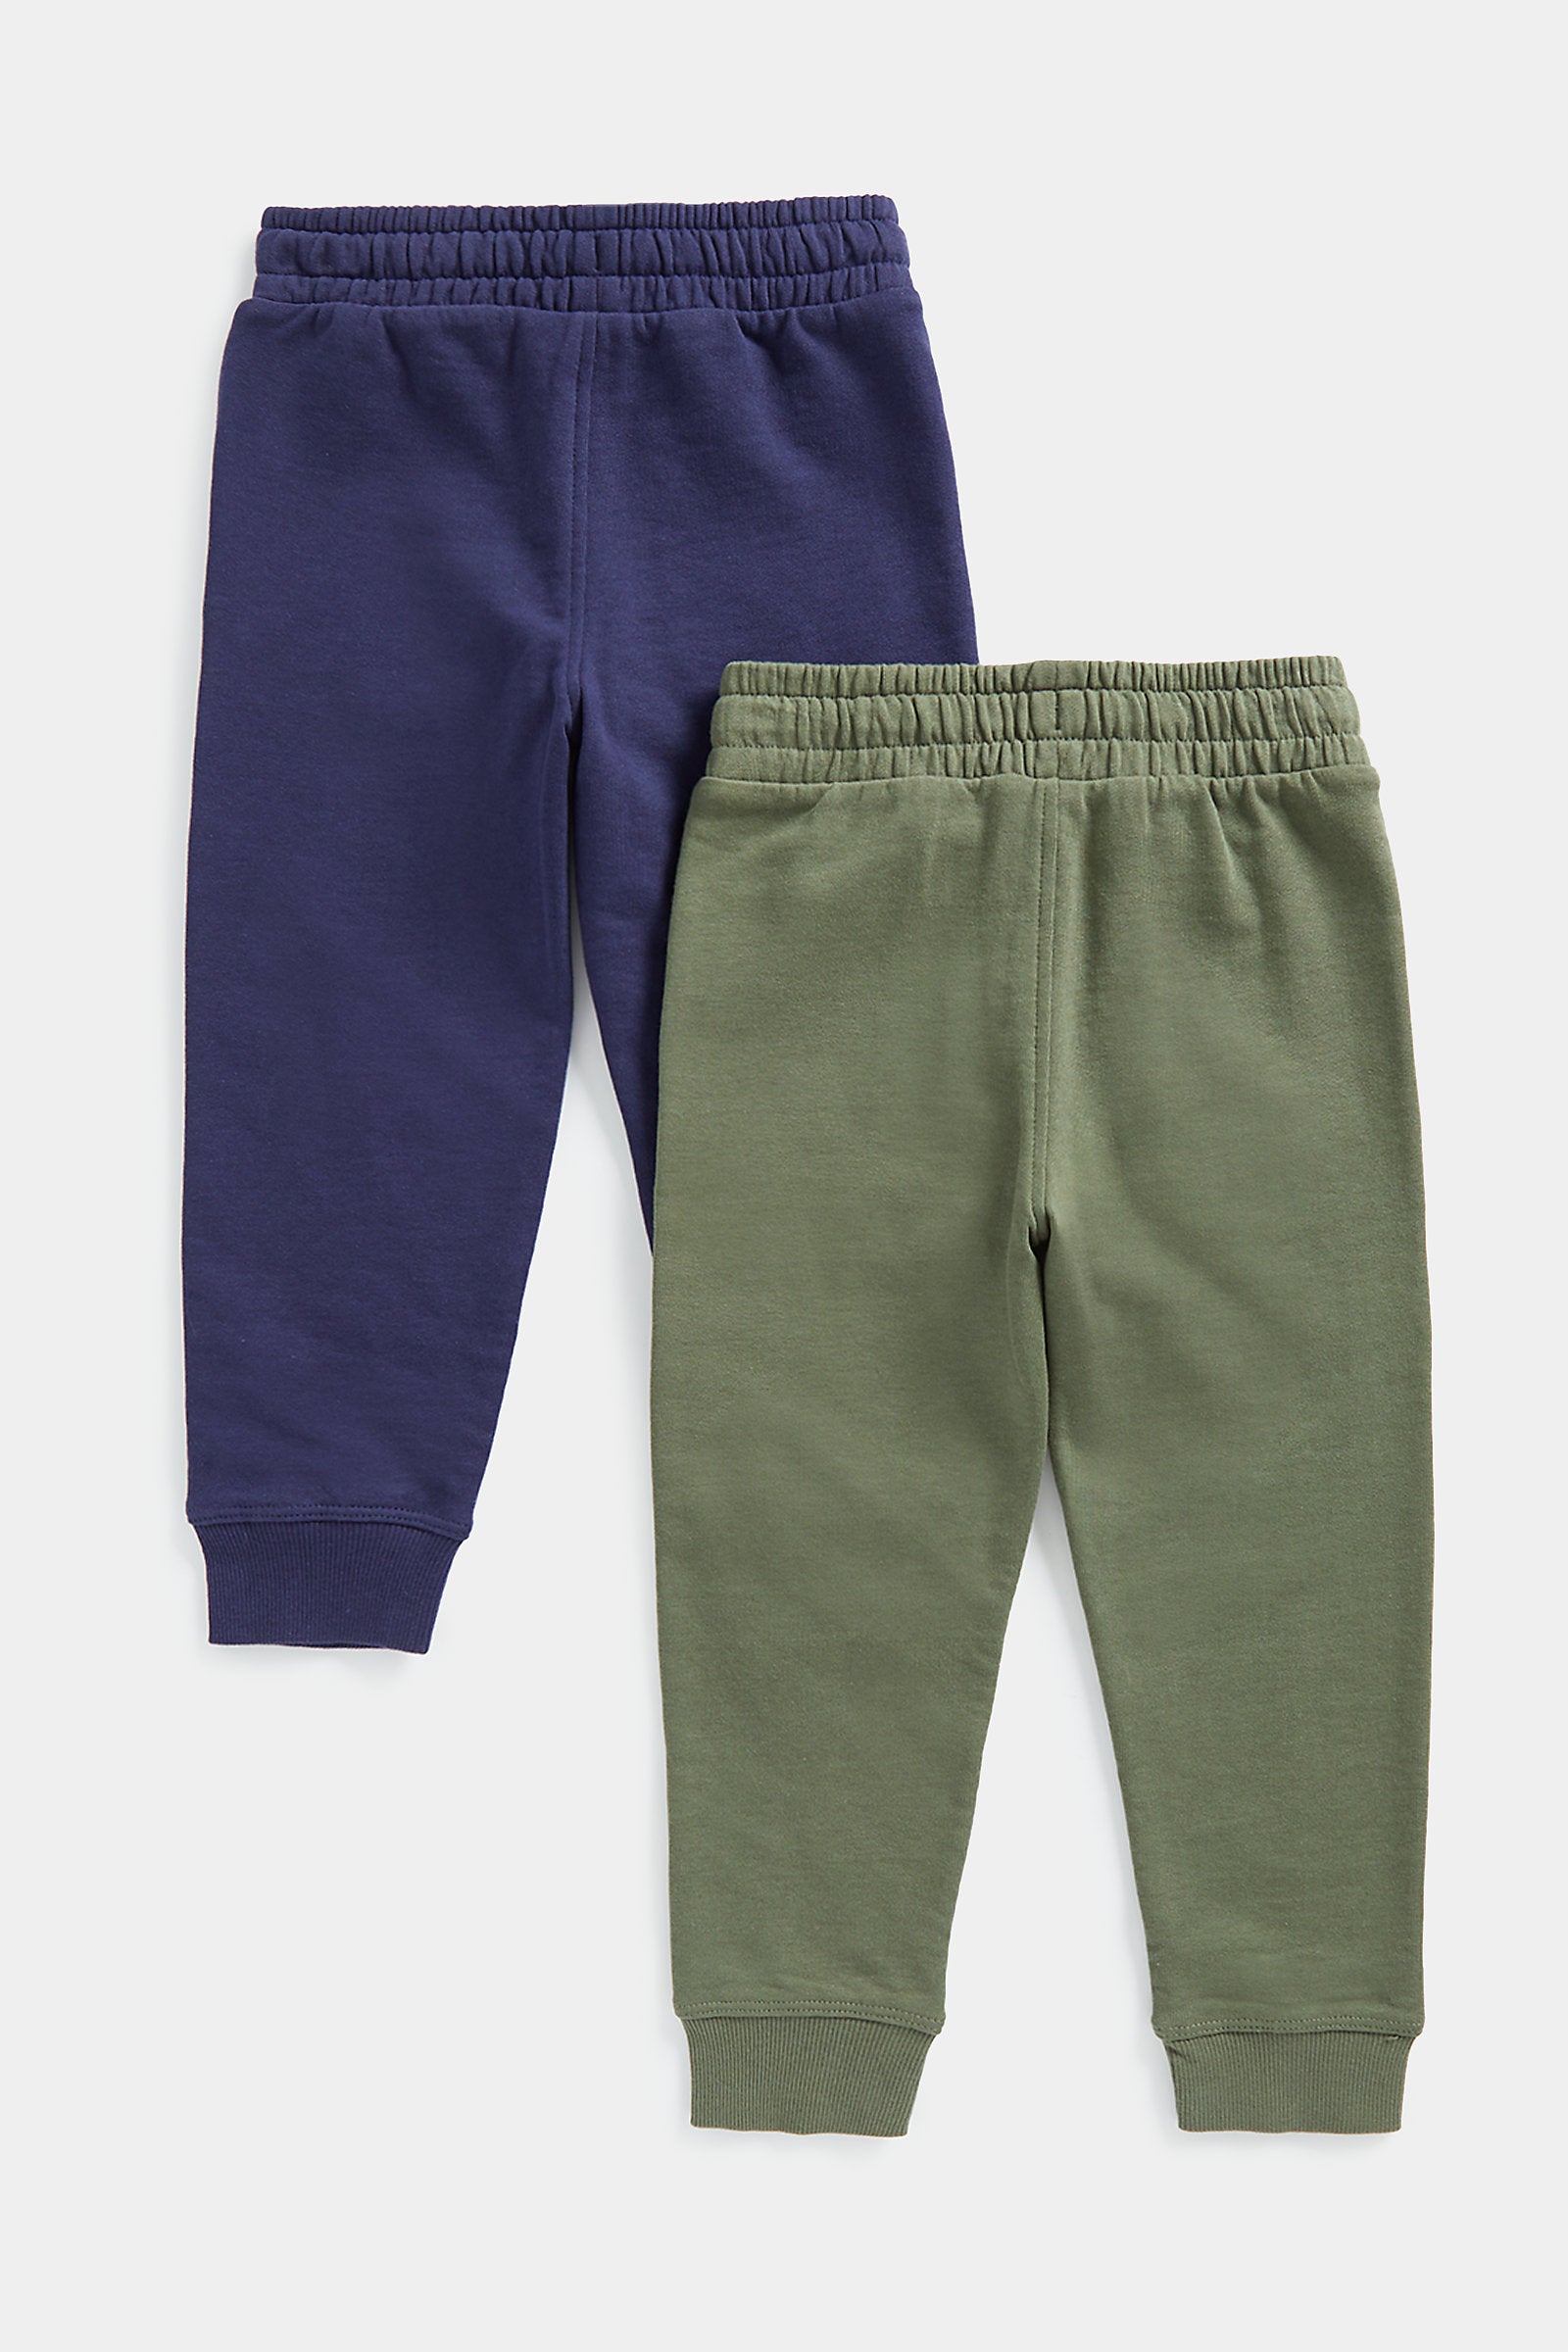 Mothercare Navy and Khaki Joggers - 2 Pack